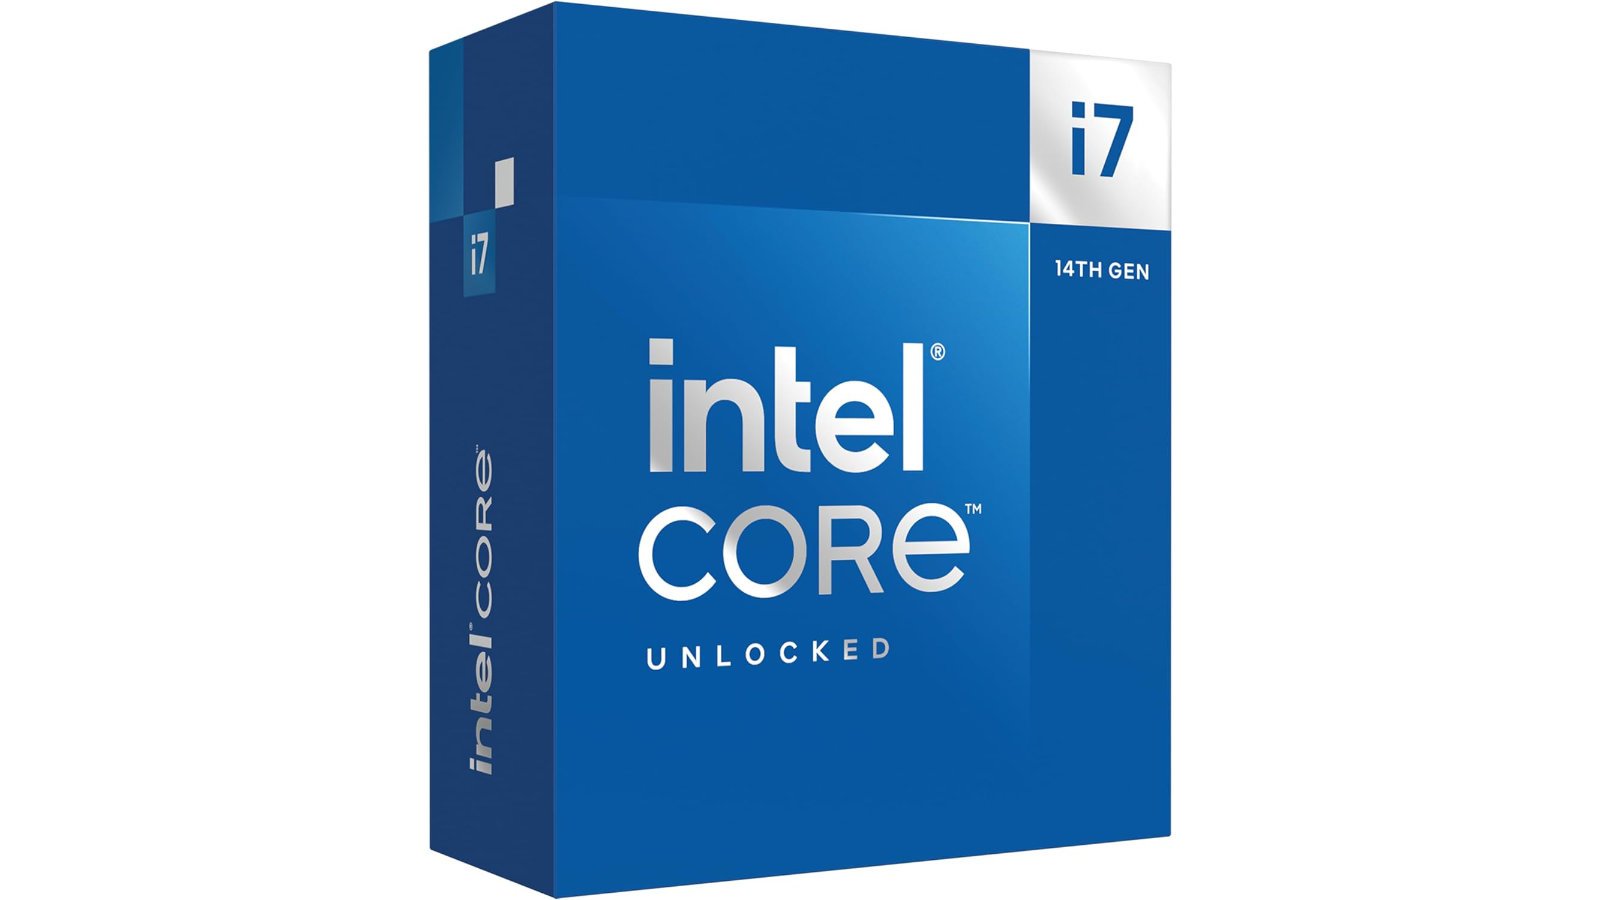 Intel Core i7-13700K product image against a white background.